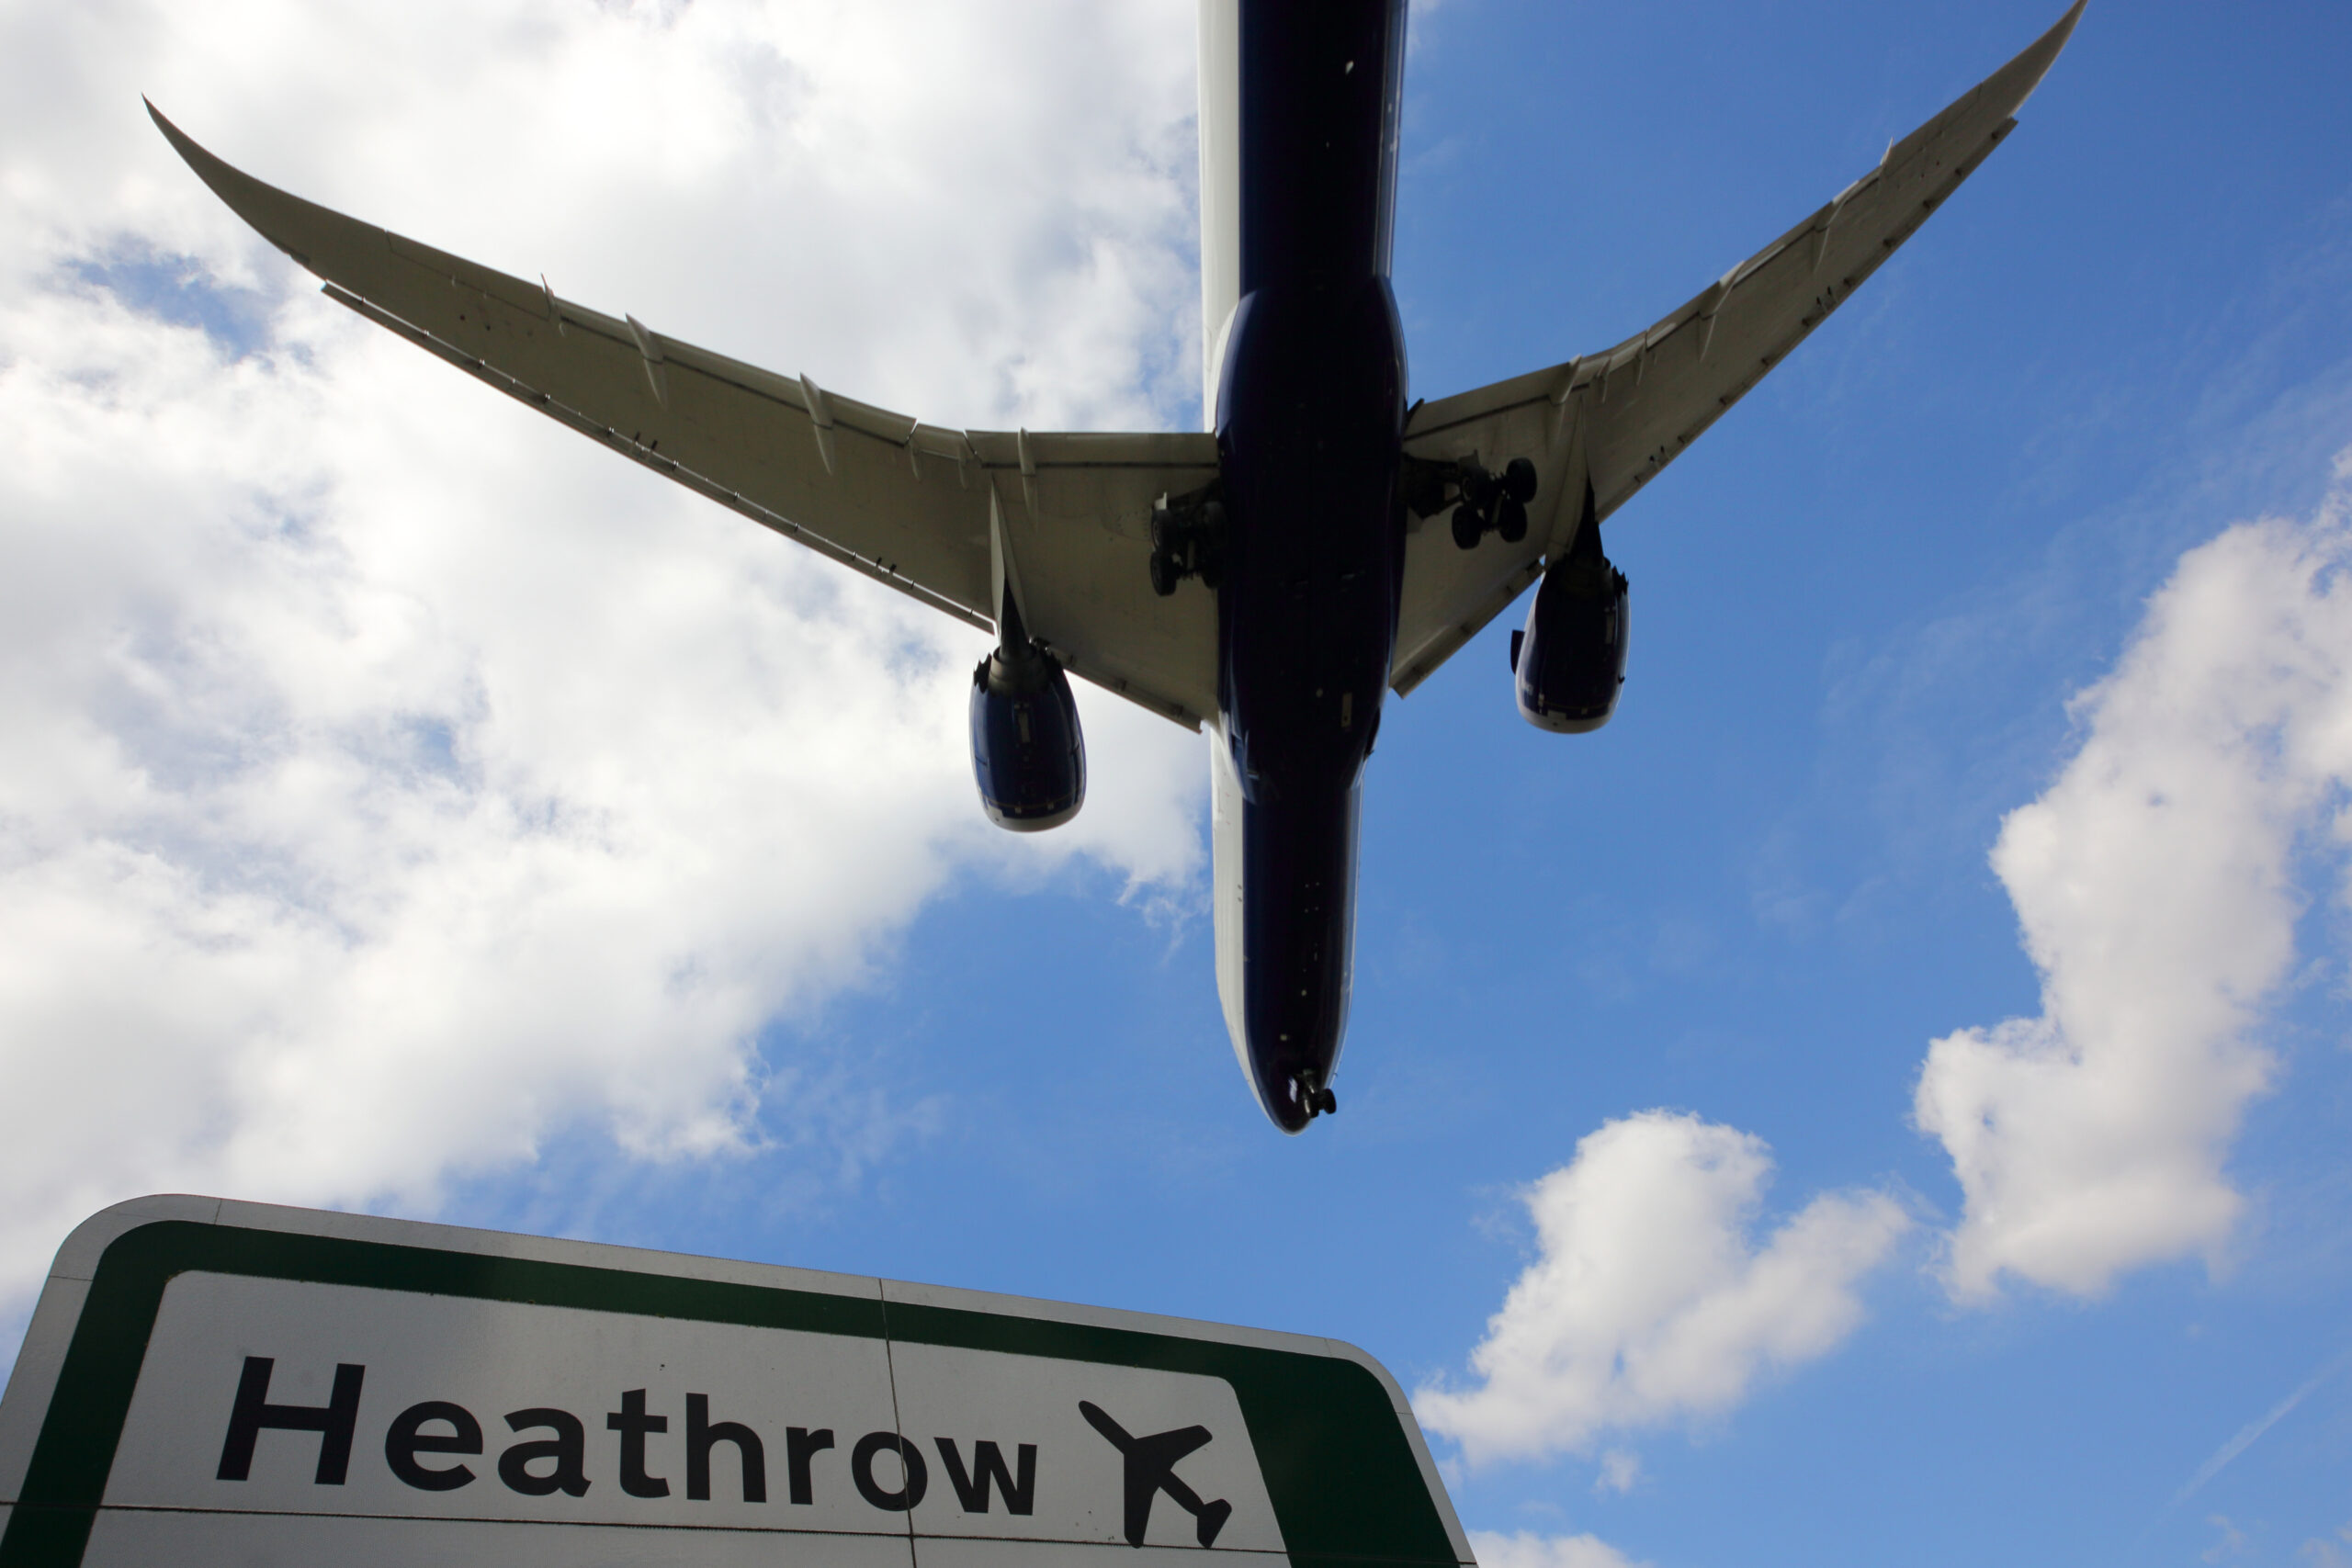 Heathrow Airport sign and plane